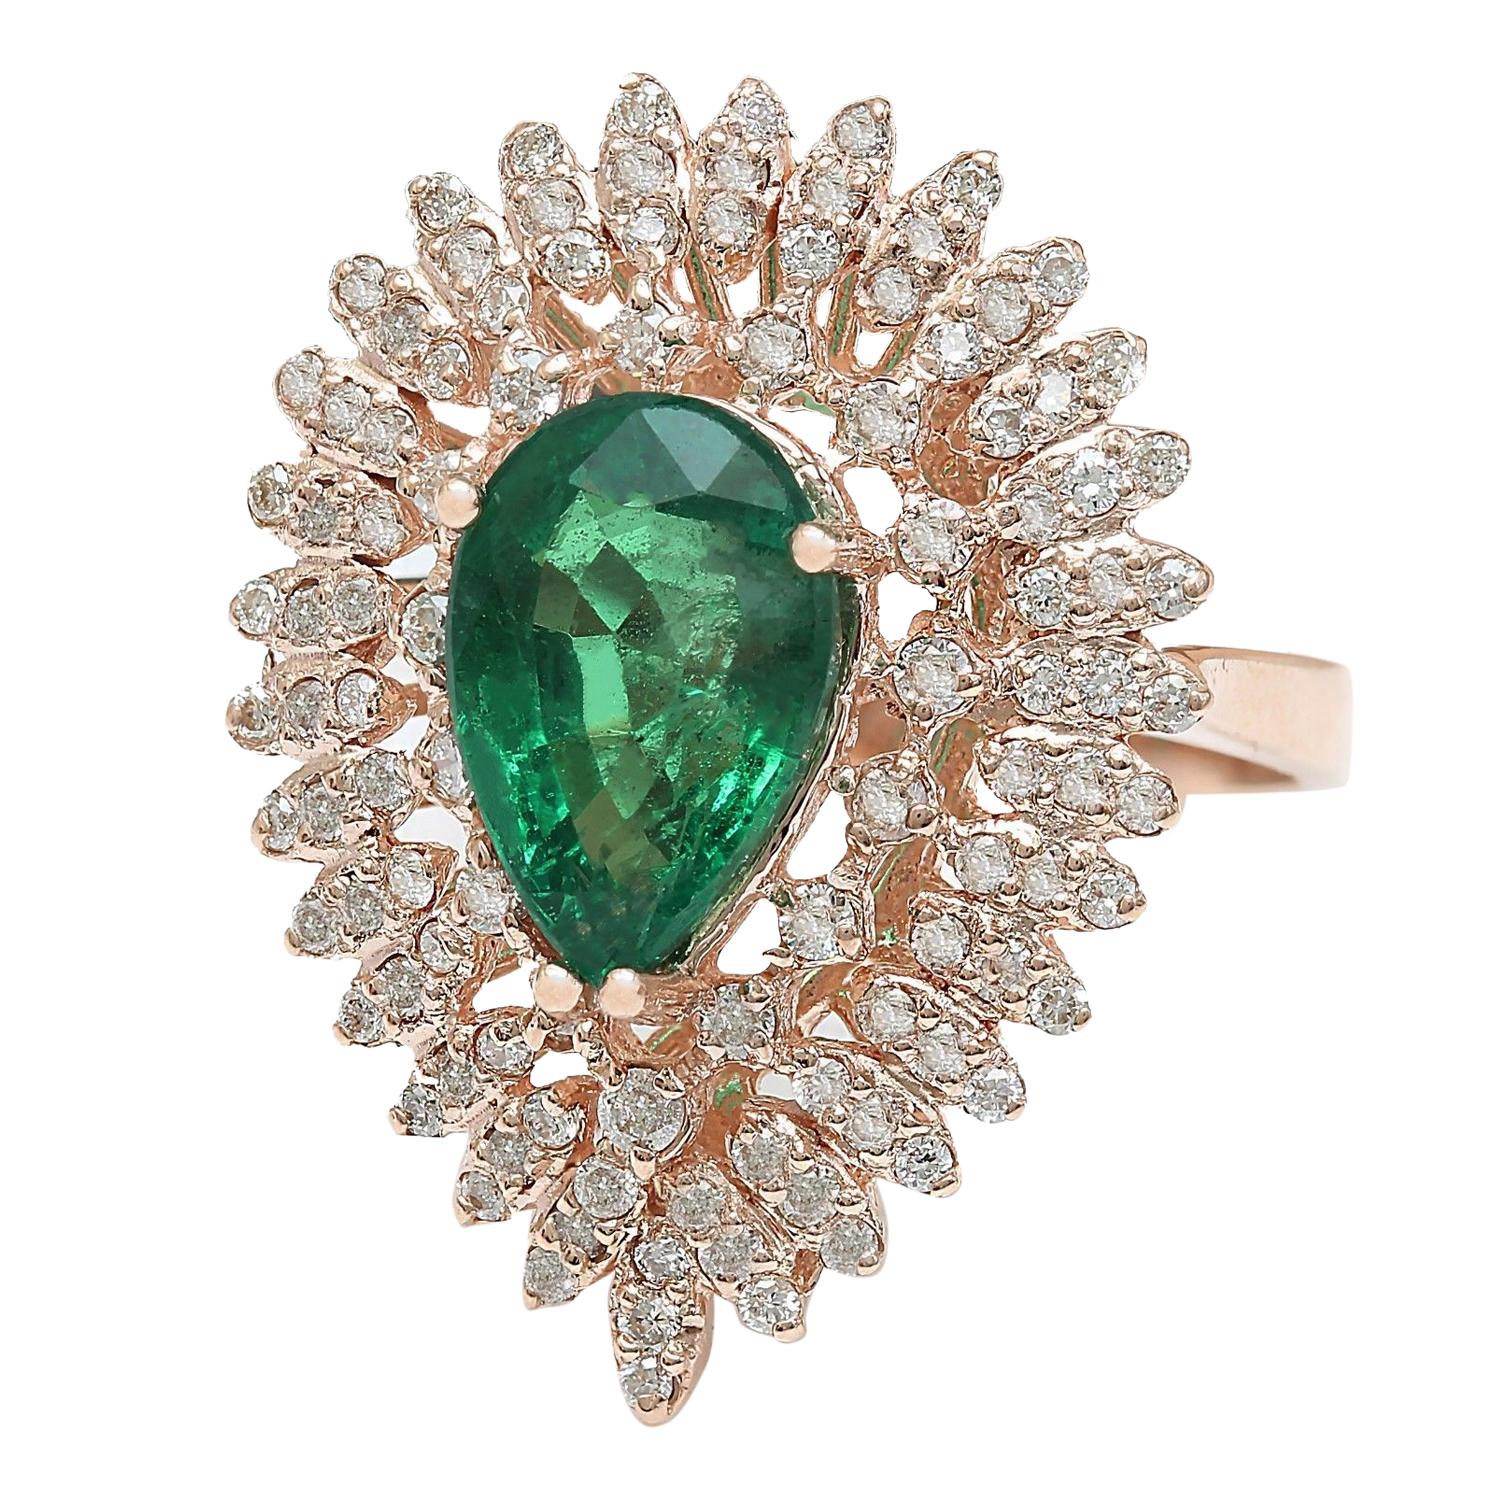 4.68 Carat Natural Emerald 14K Solid Rose Gold Diamond Ring
 Item Type: Ring
 Item Style: Engagement
 Material: 14K Rose Gold
 Mainstone: Emerald
 Stone Color: Green
 Stone Weight: 3.43 Carat
 Stone Shape: Pear
 Stone Quantity: 1
 Stone Dimensions: